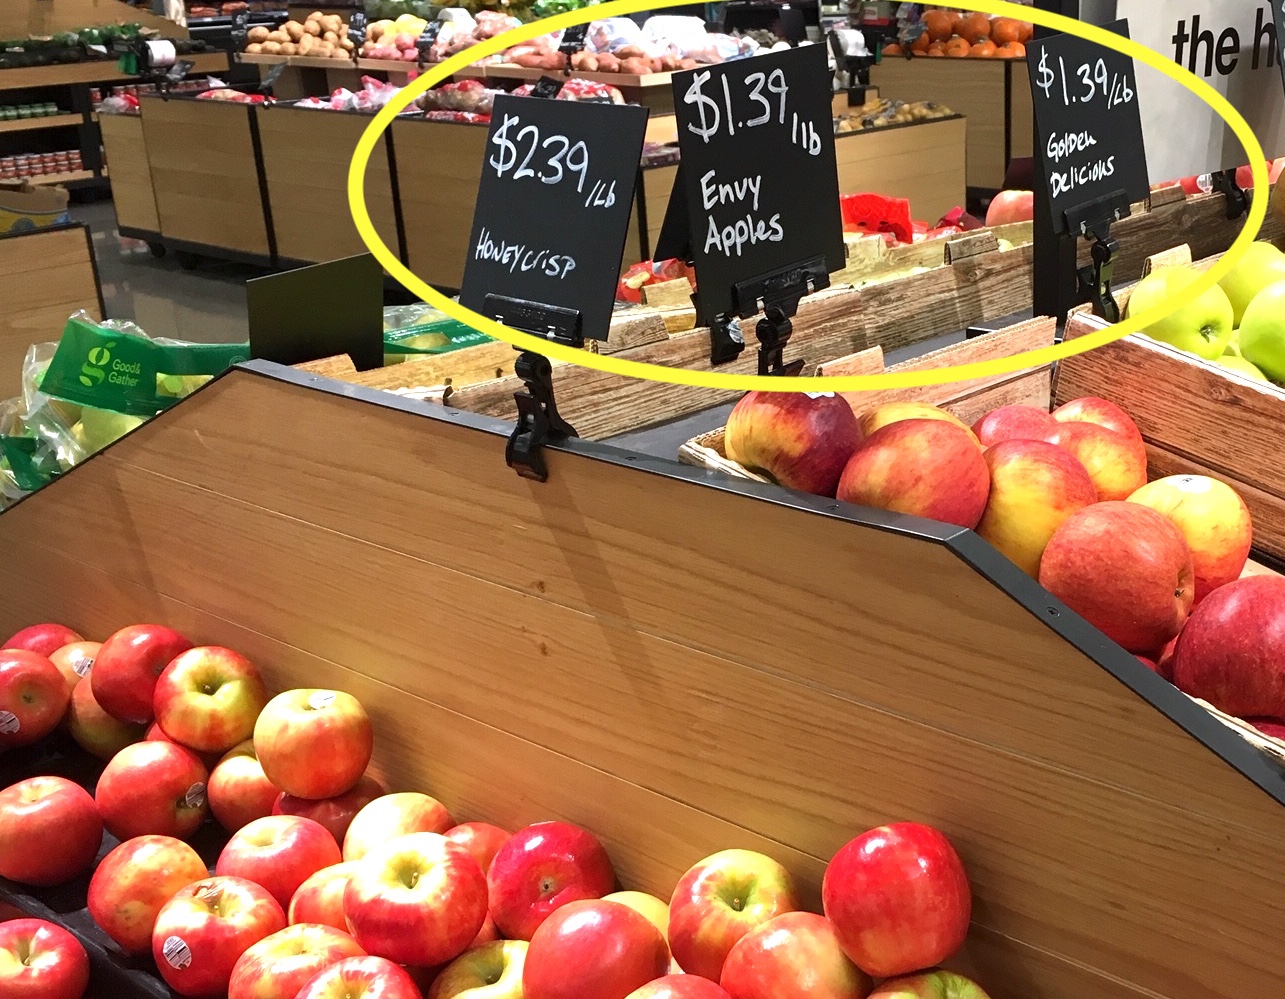 Why are Honeycrisp apples still so expensive?